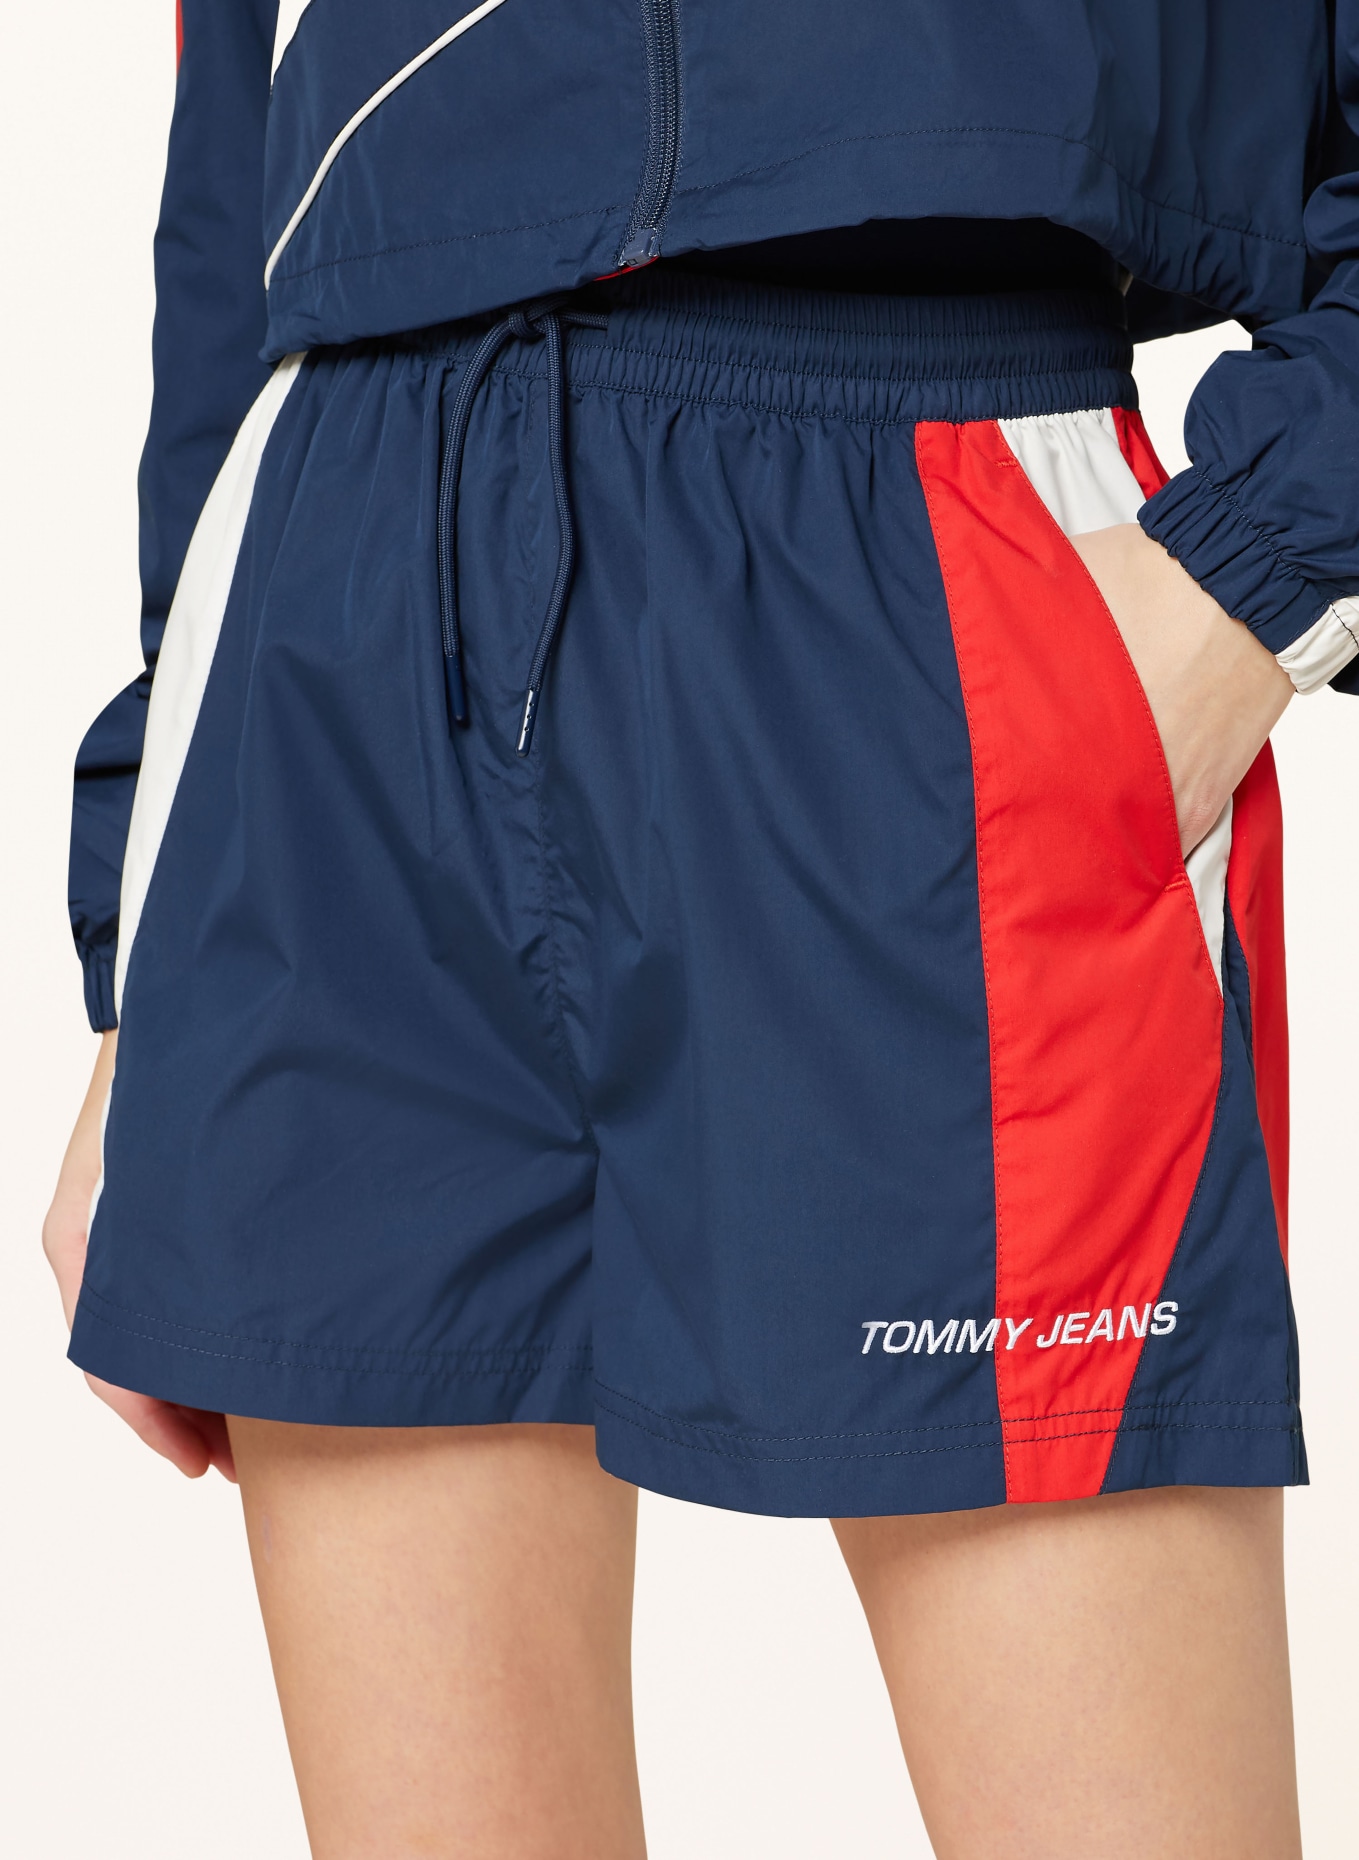 TOMMY JEANS Shorts, Color: DARK BLUE/ WHITE/ RED (Image 5)